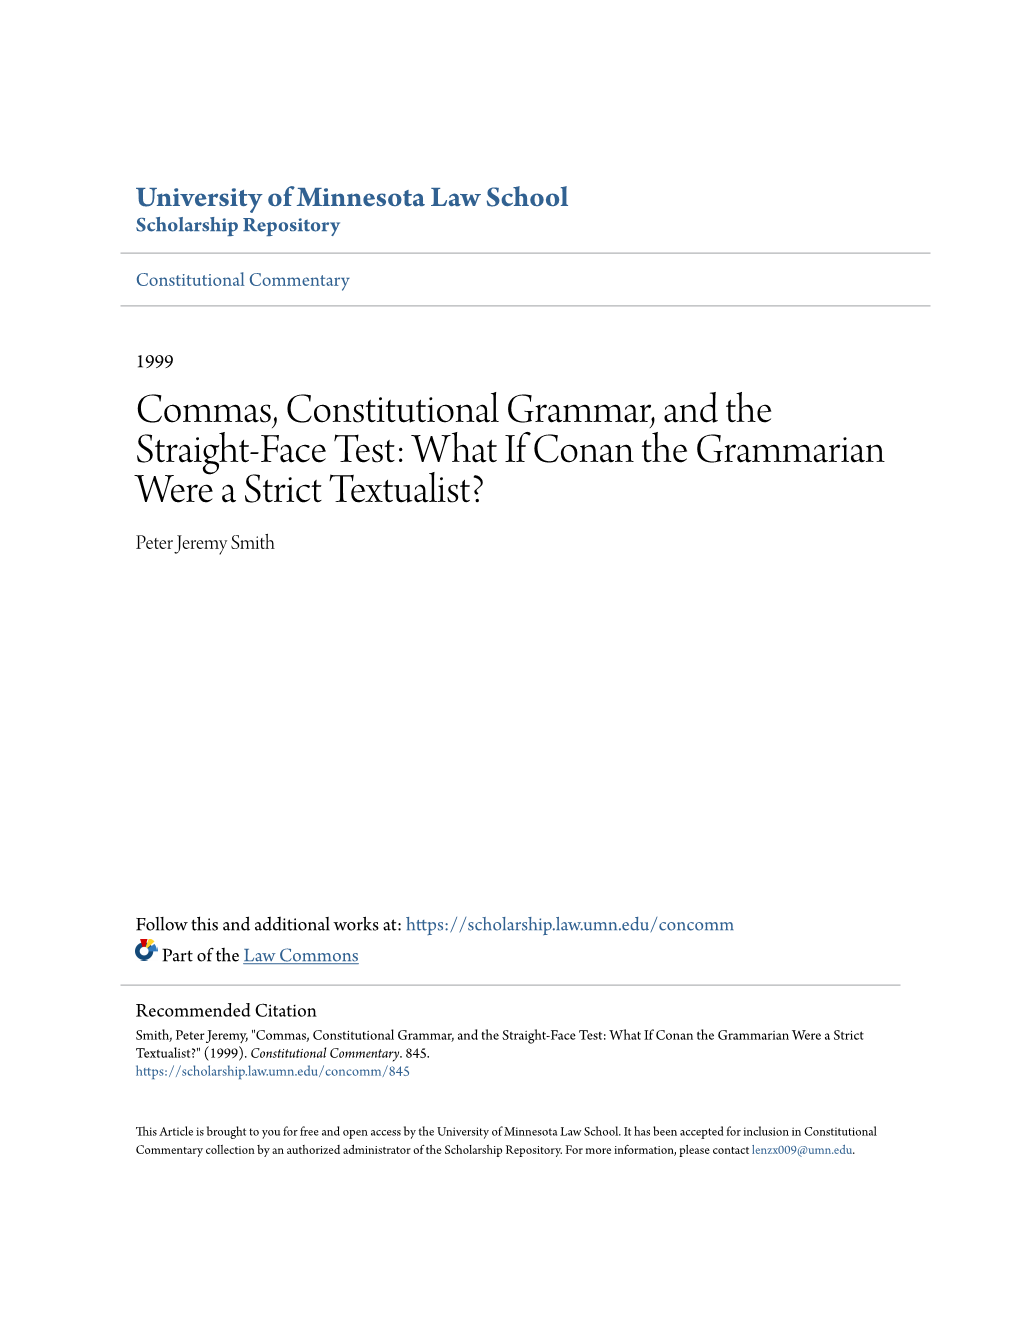 Commas, Constitutional Grammar, and the Straight-Face Test: What If Conan the Grammarian Were a Strict Textualist? Peter Jeremy Smith